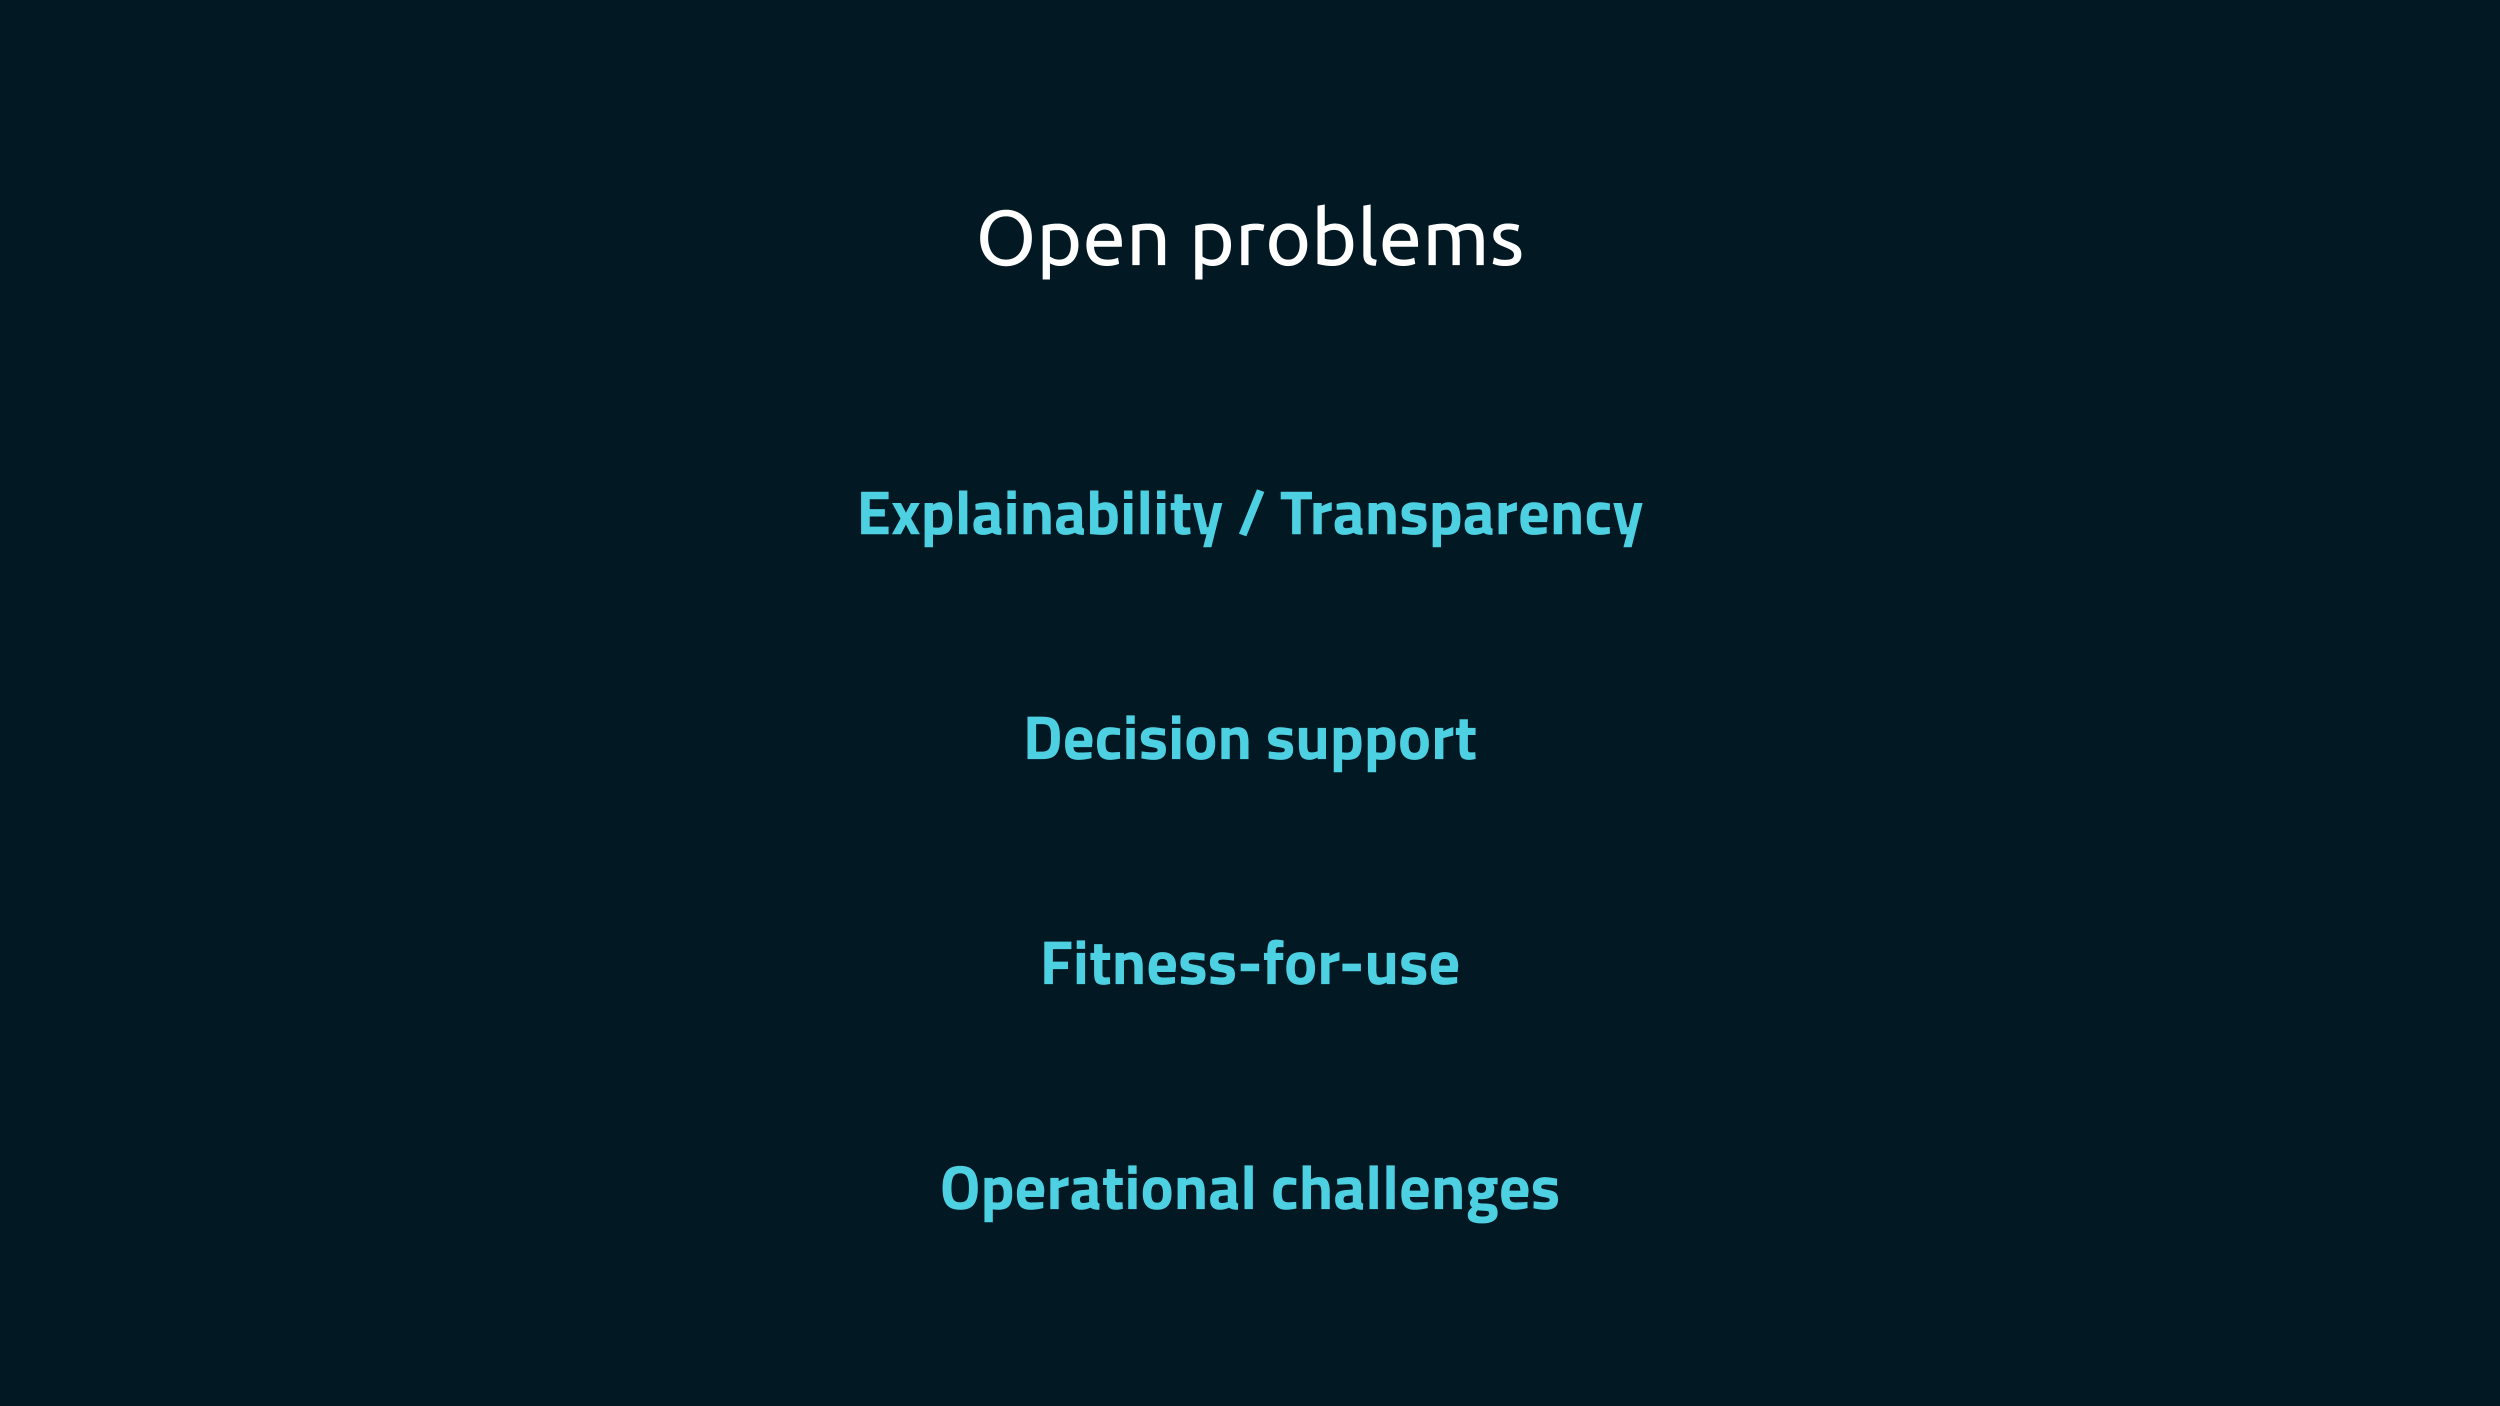 A slide titled "Open problems", listing four areas: "Explainability /
Transparency", "Decision support", "Fitness-for-use", and "Operational
challenges".